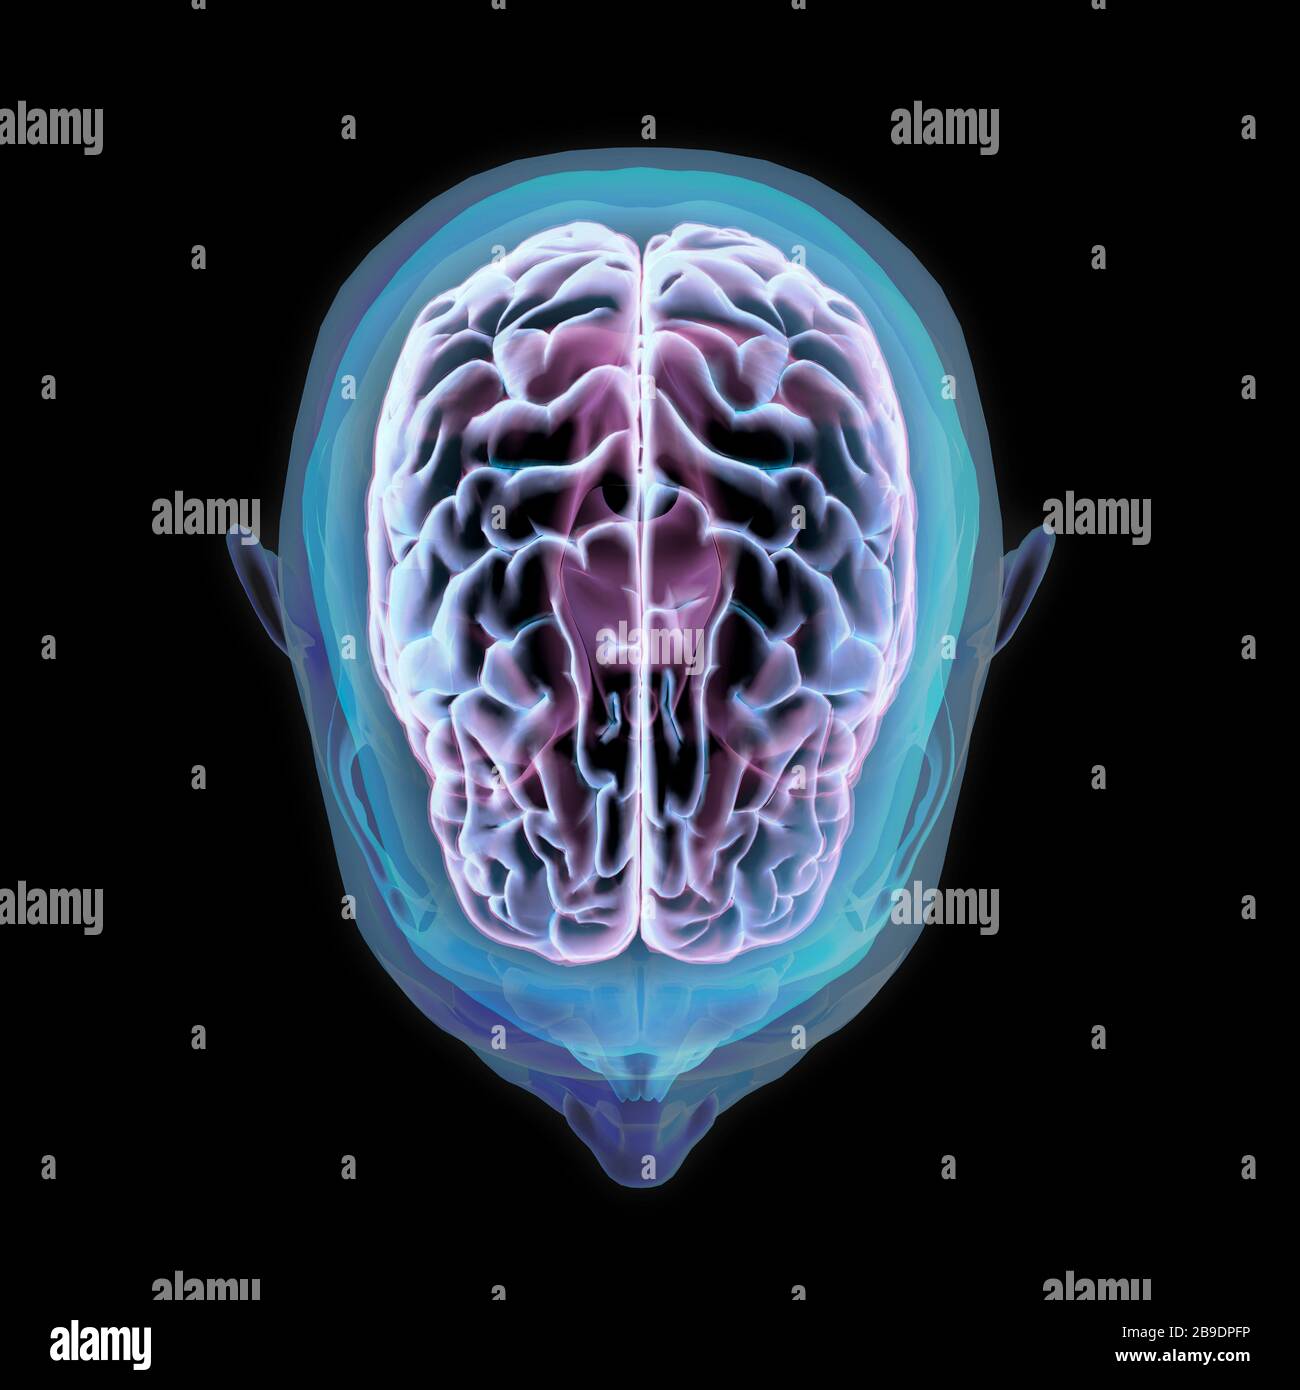 3D rendering of human head and brain with glow, top view on black background. Stock Photo